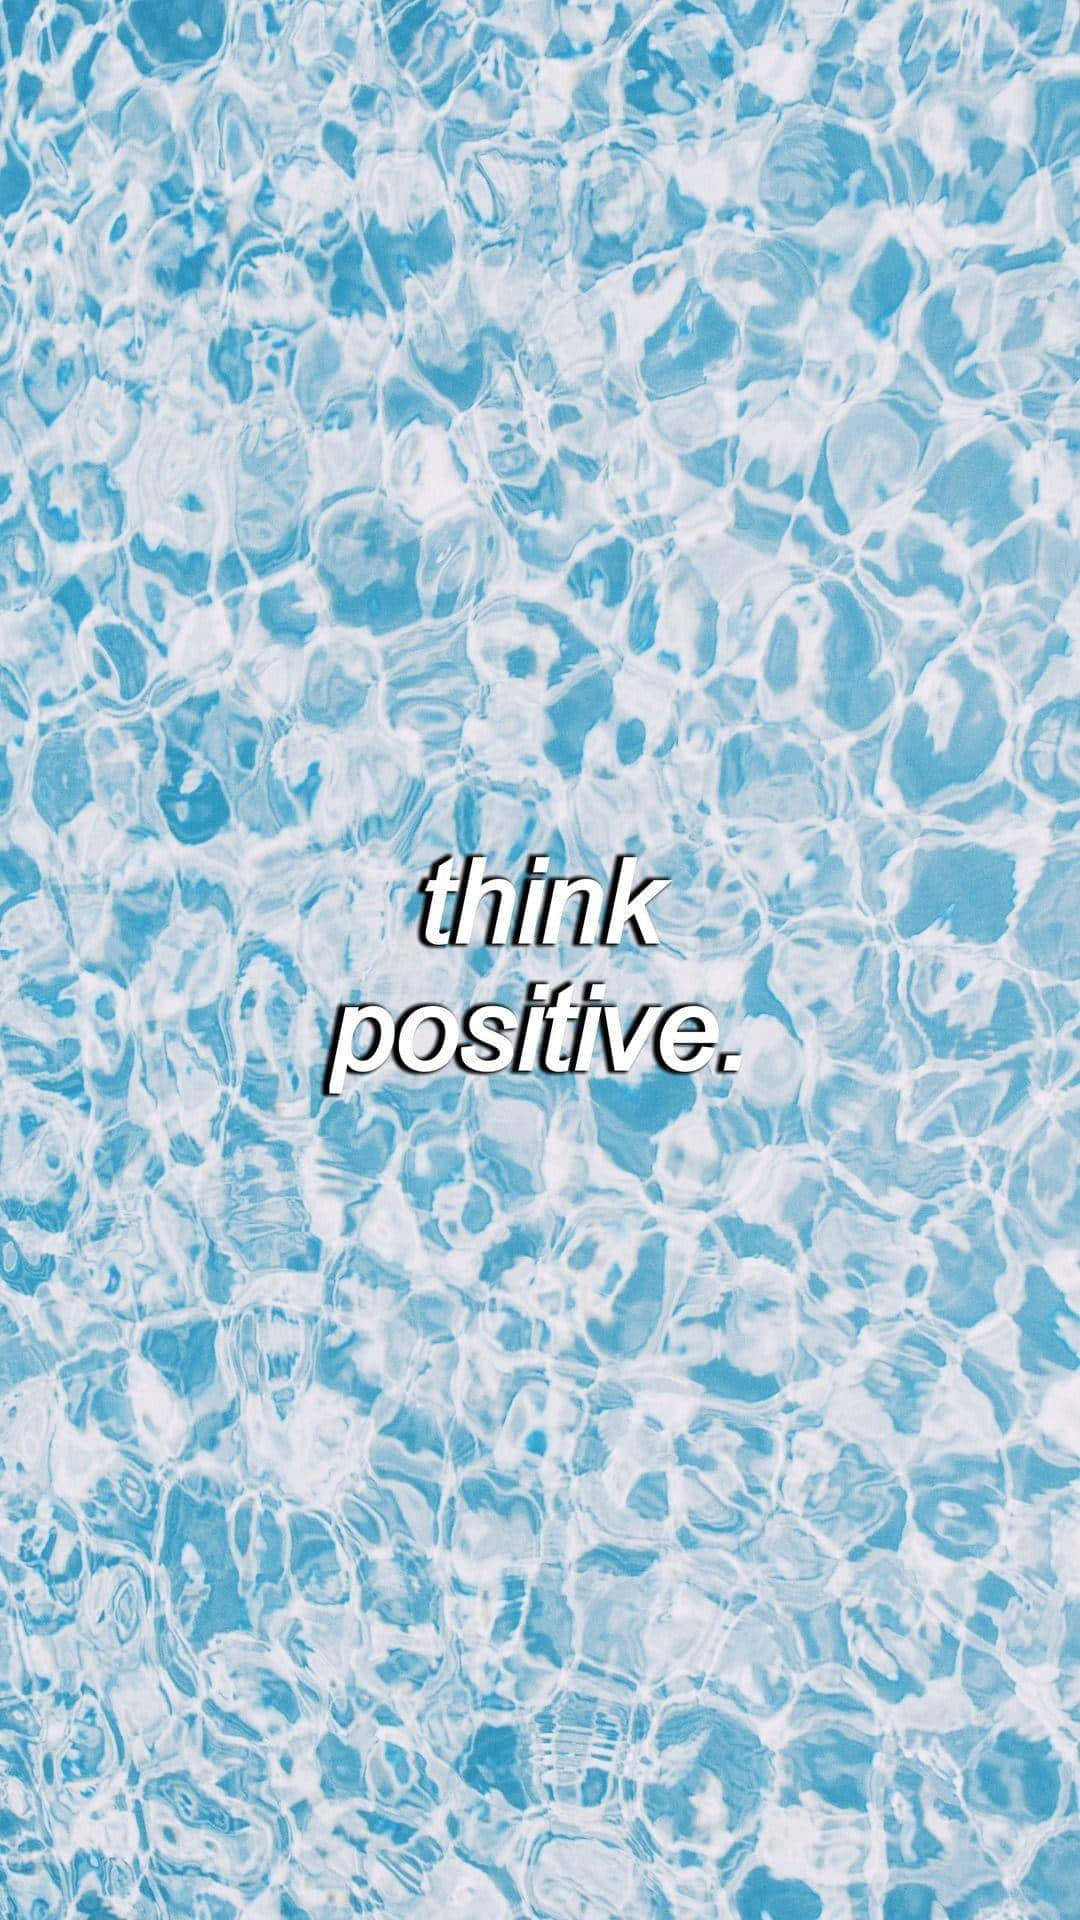 Blue Water Positive Quote Aesthetic.jpg Wallpaper